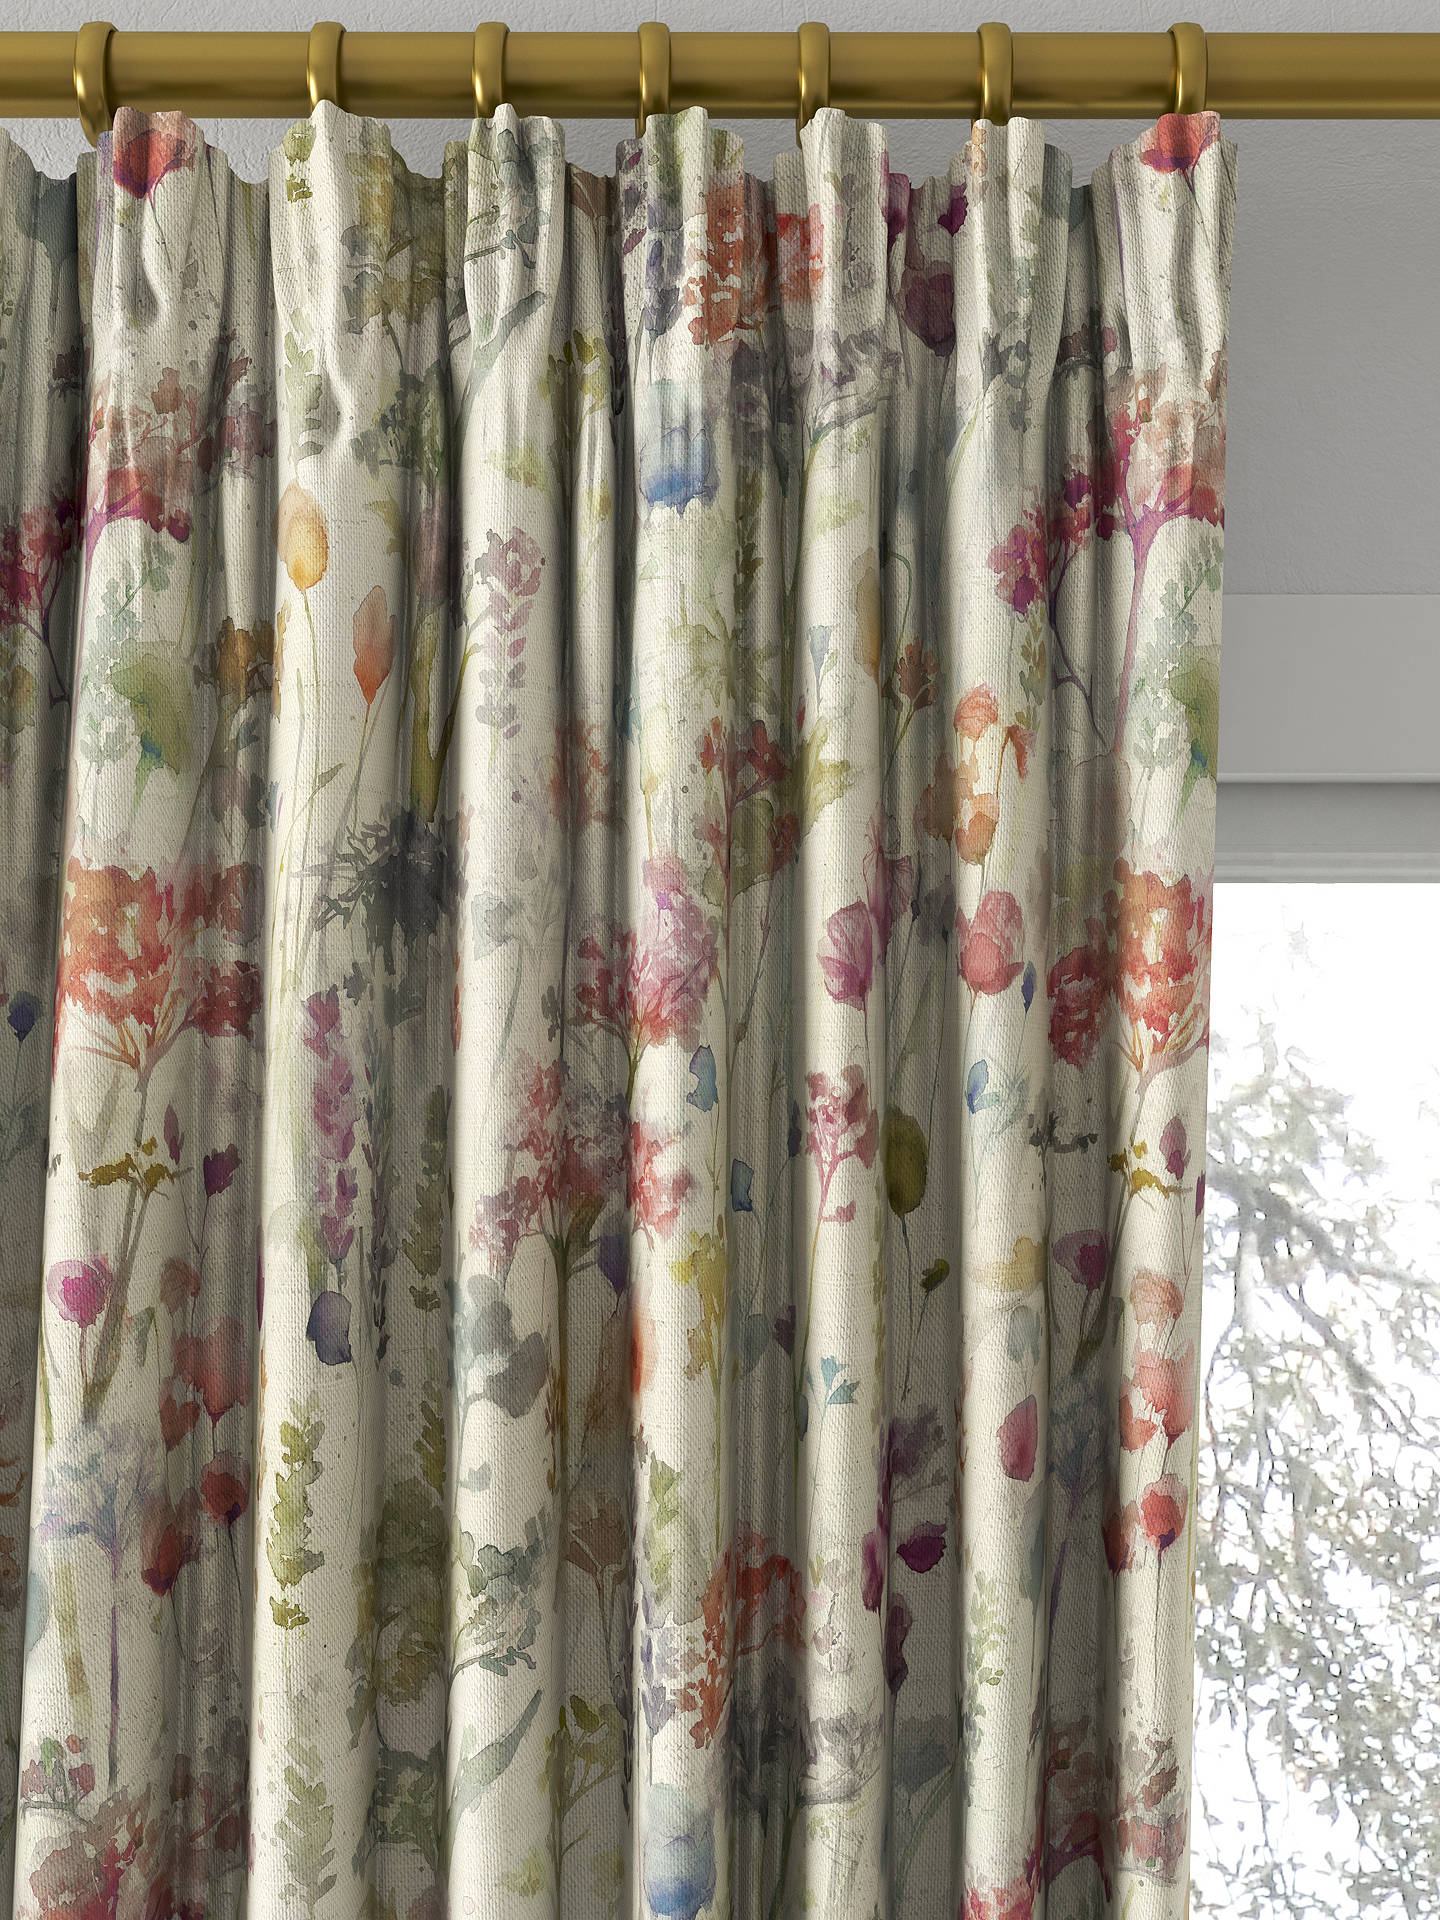 Voyage Ilinzas Made to Measure Curtains, Poppy Natural